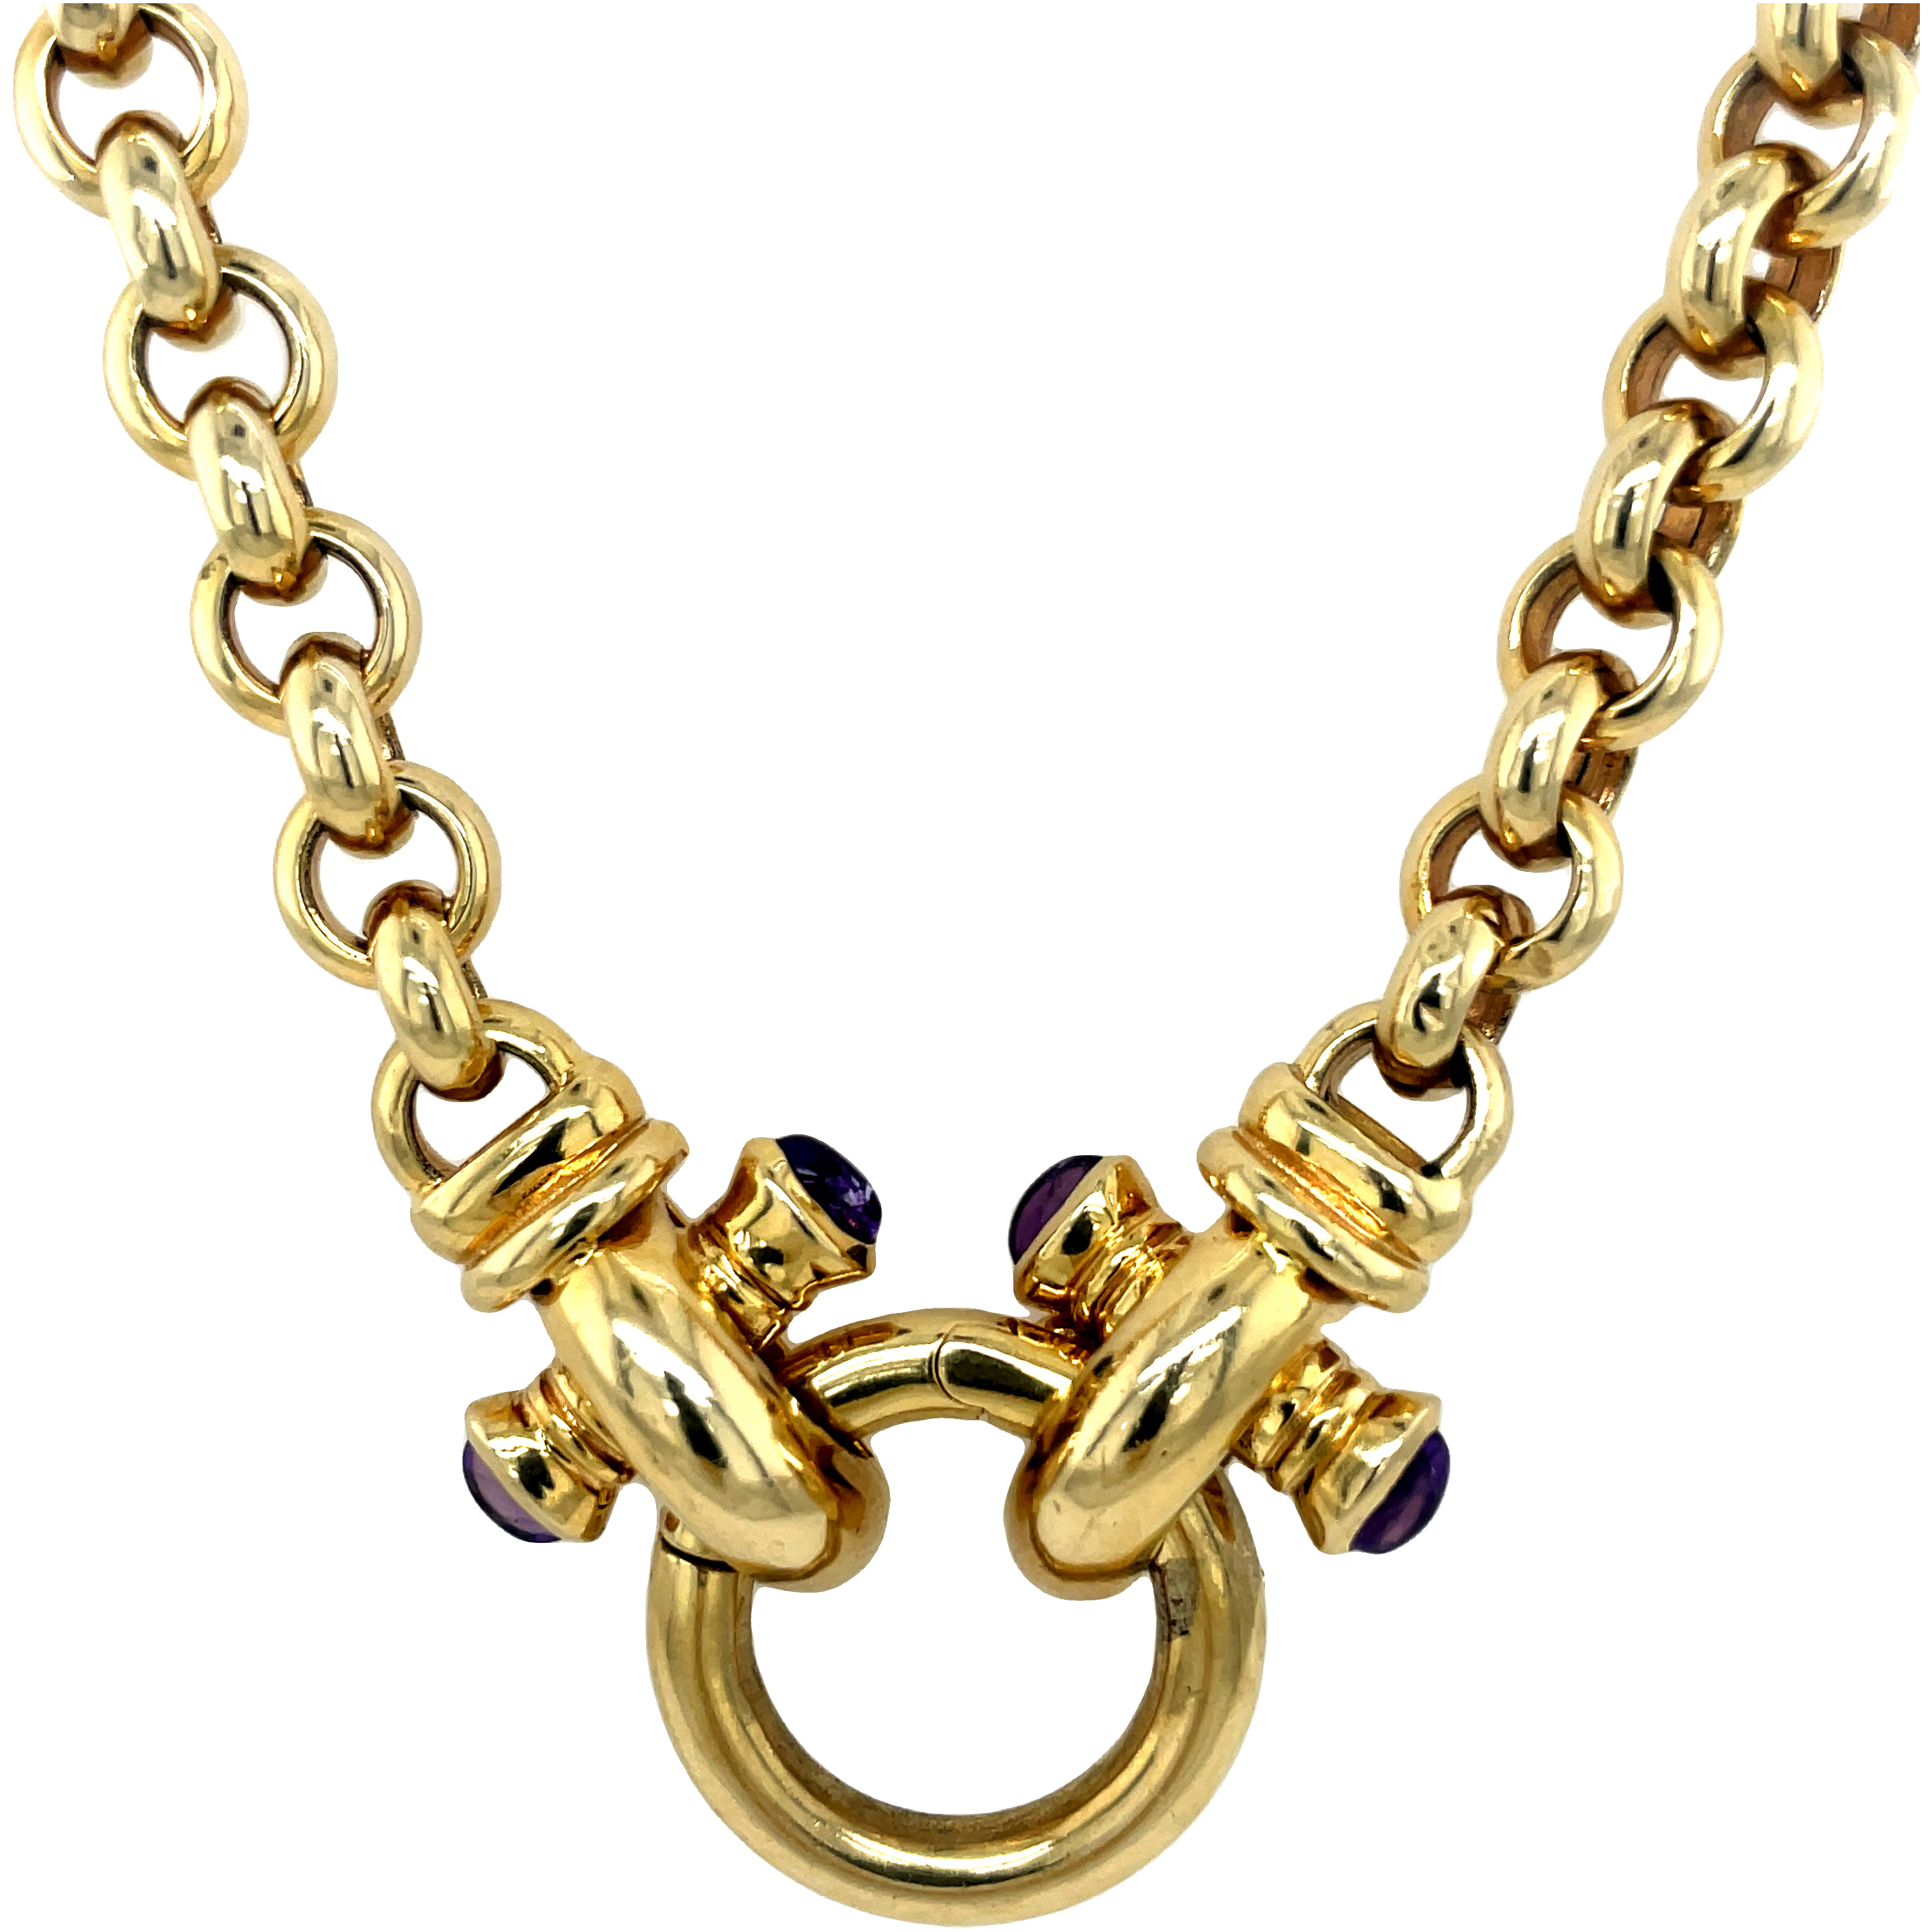 Show off your confidence with this luxurious 14K gold necklace accented with two breathtaking amethyst cabochons—a timeless statement of timeless luxury.